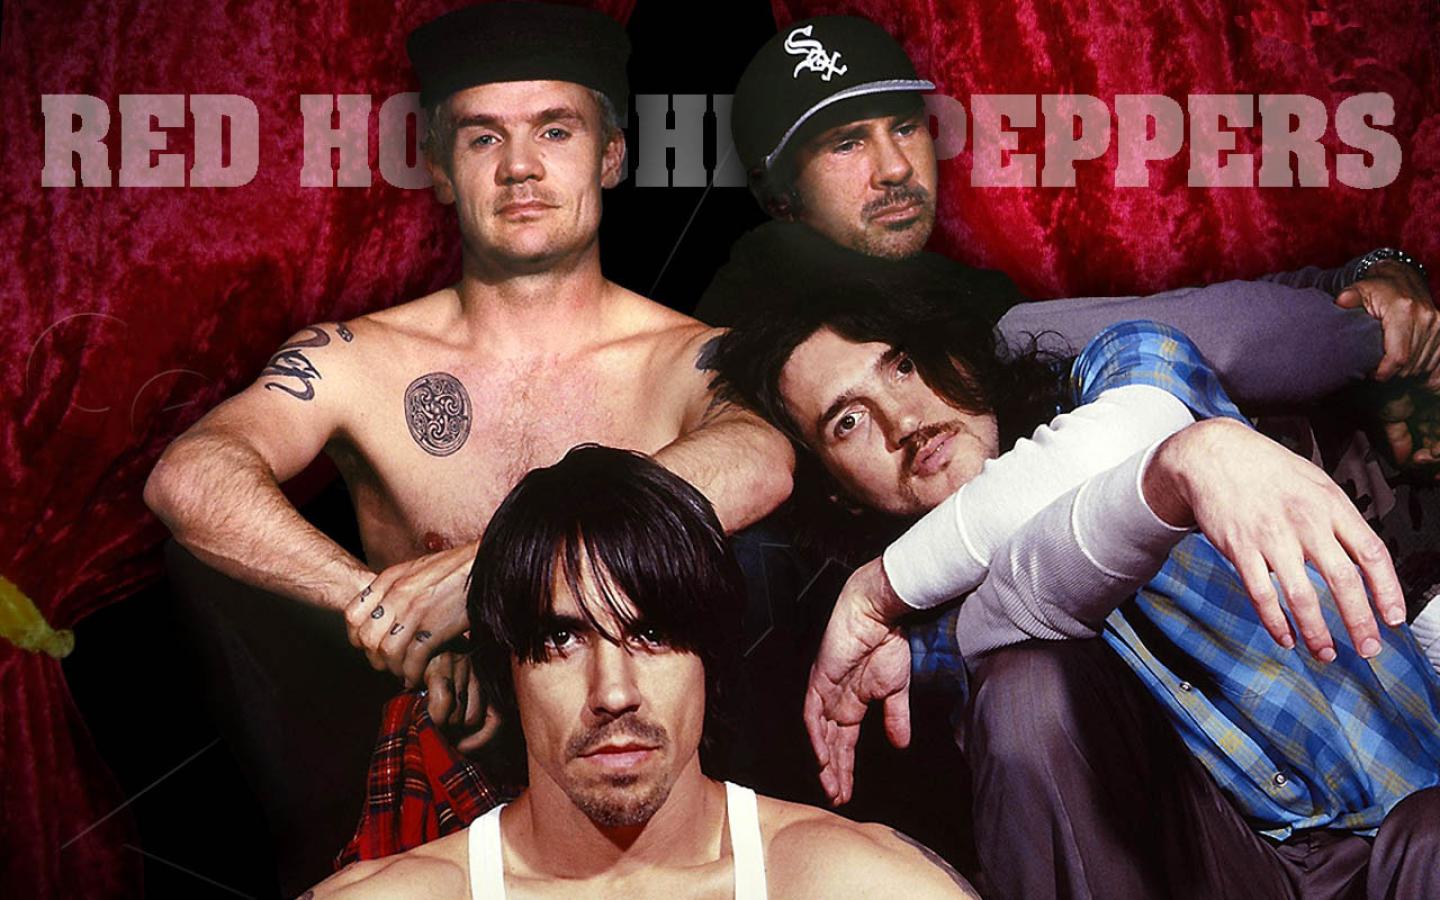 Red Hot Chilli Peppers Wallpaper #1 1440 x 900 